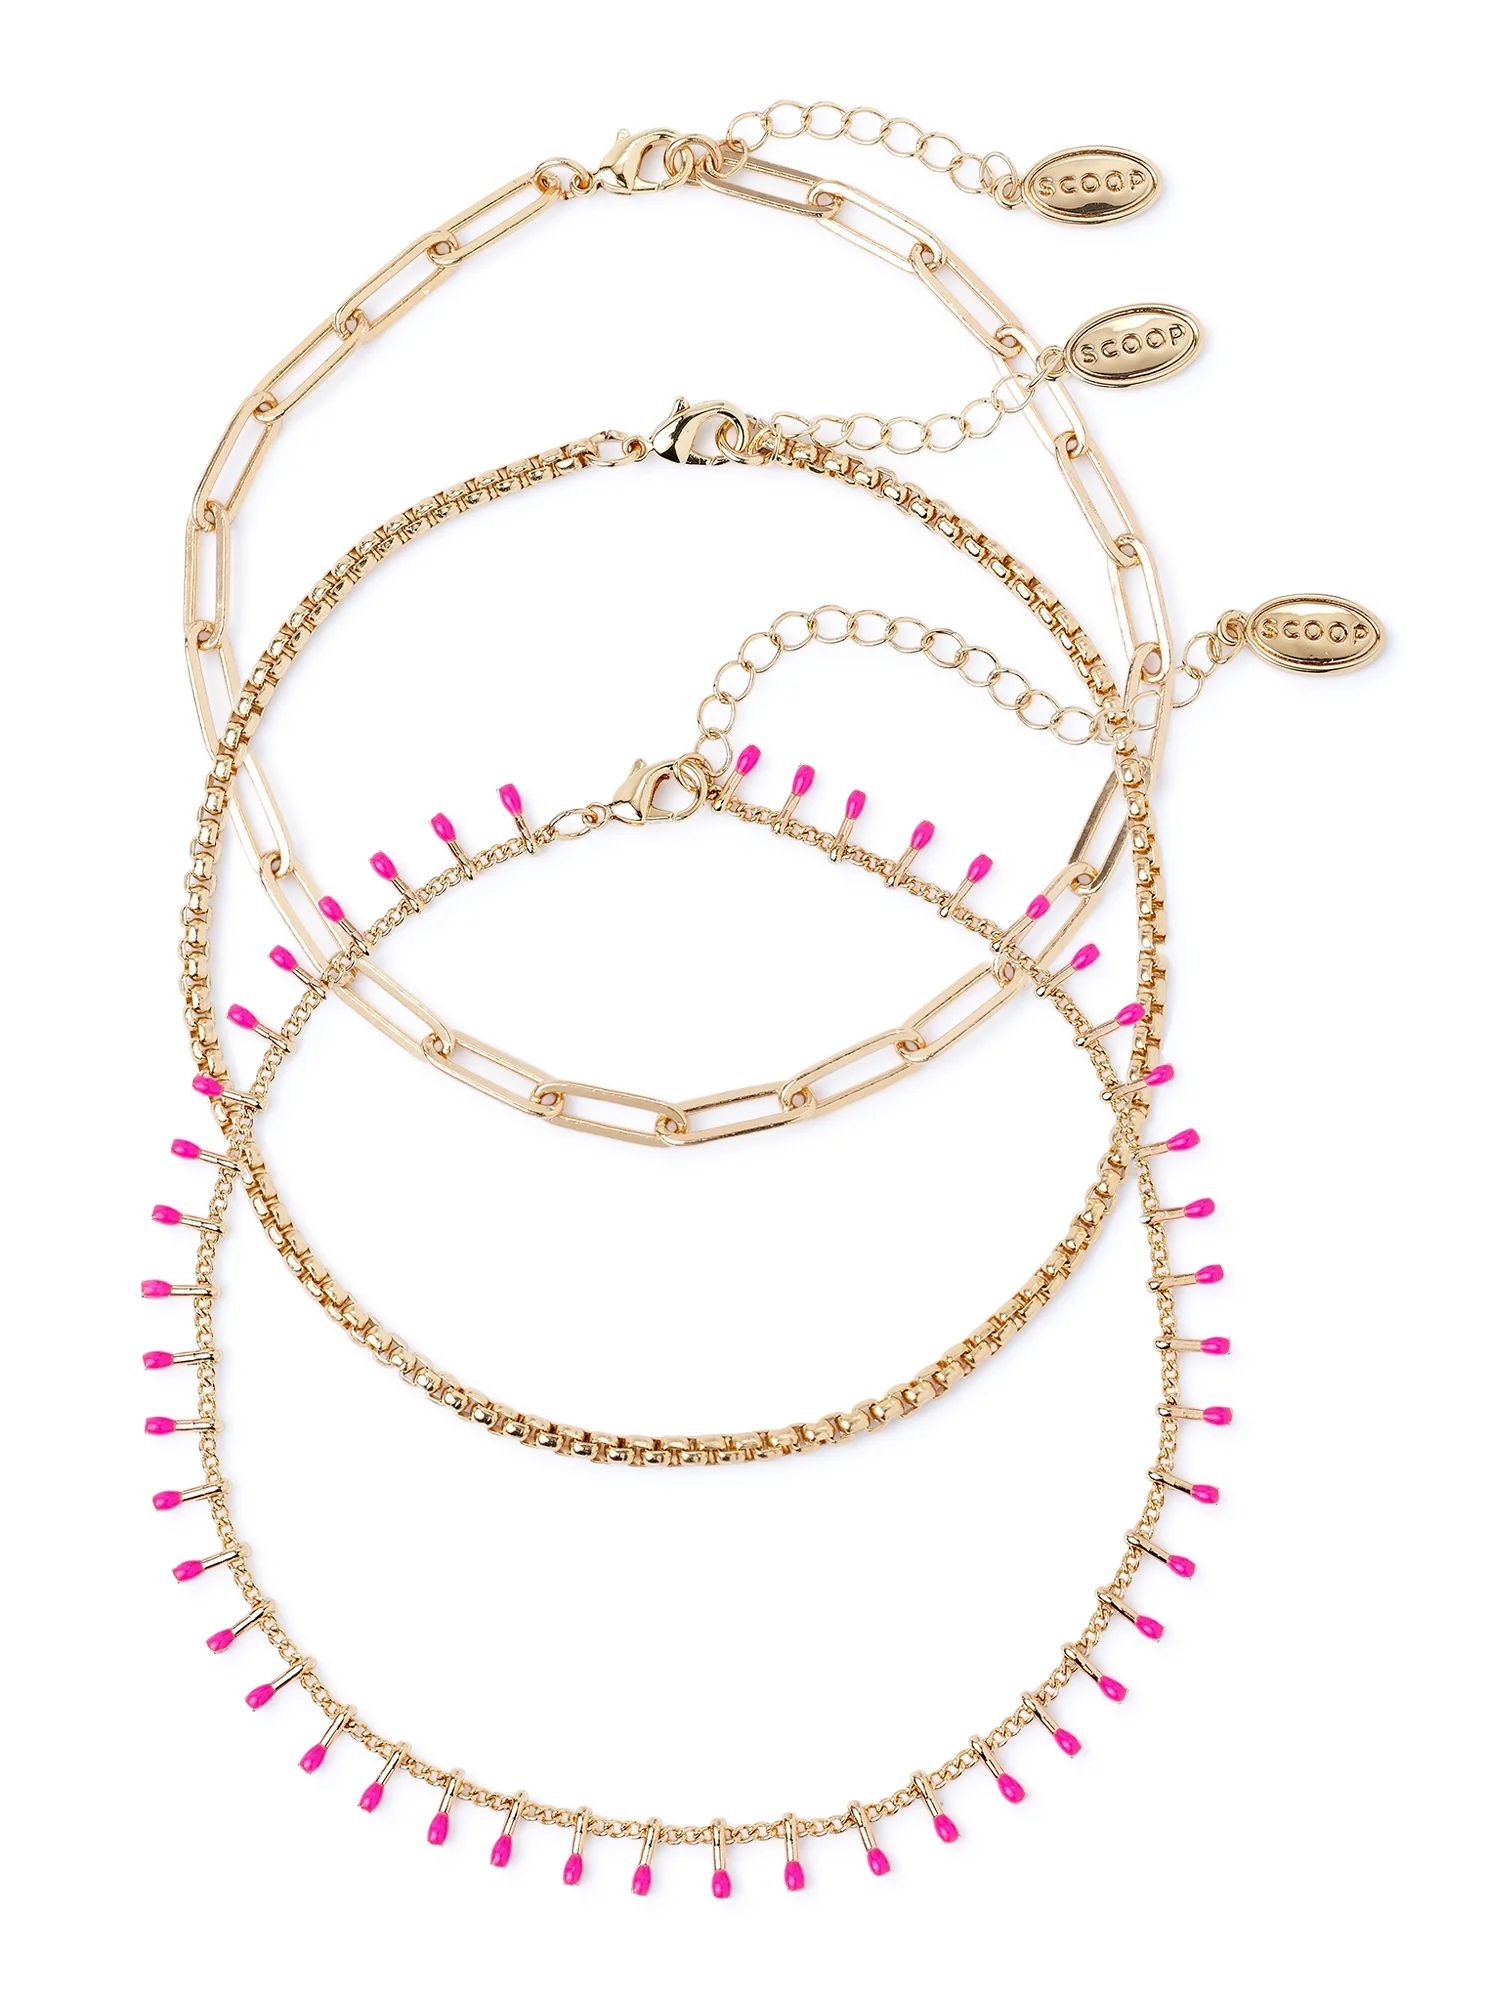 Scoop Women’s 14K Gold Flash-Plated Bead, Clip and Chain Anklets, 3-Piece Set, Pink | Walmart (US)